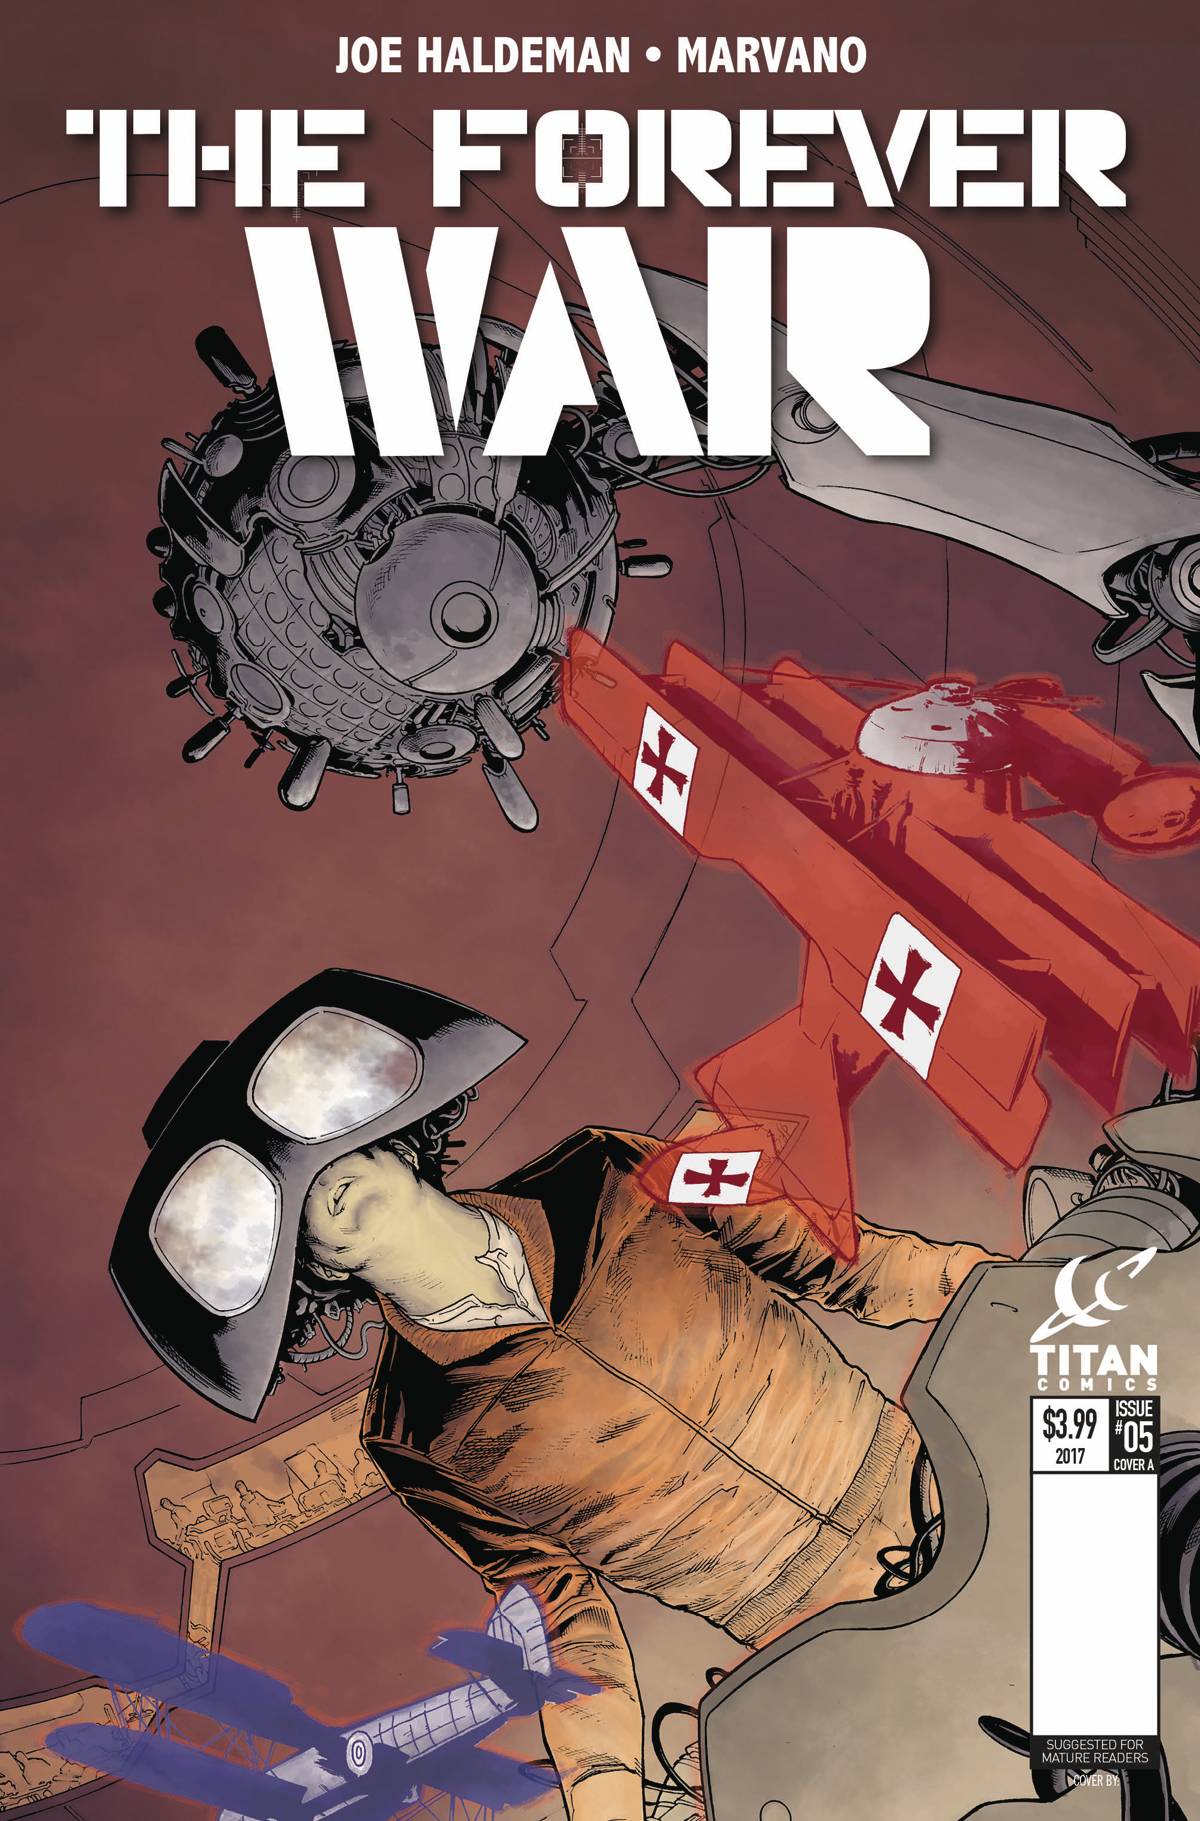 Forever War #6 Cover A Kurth